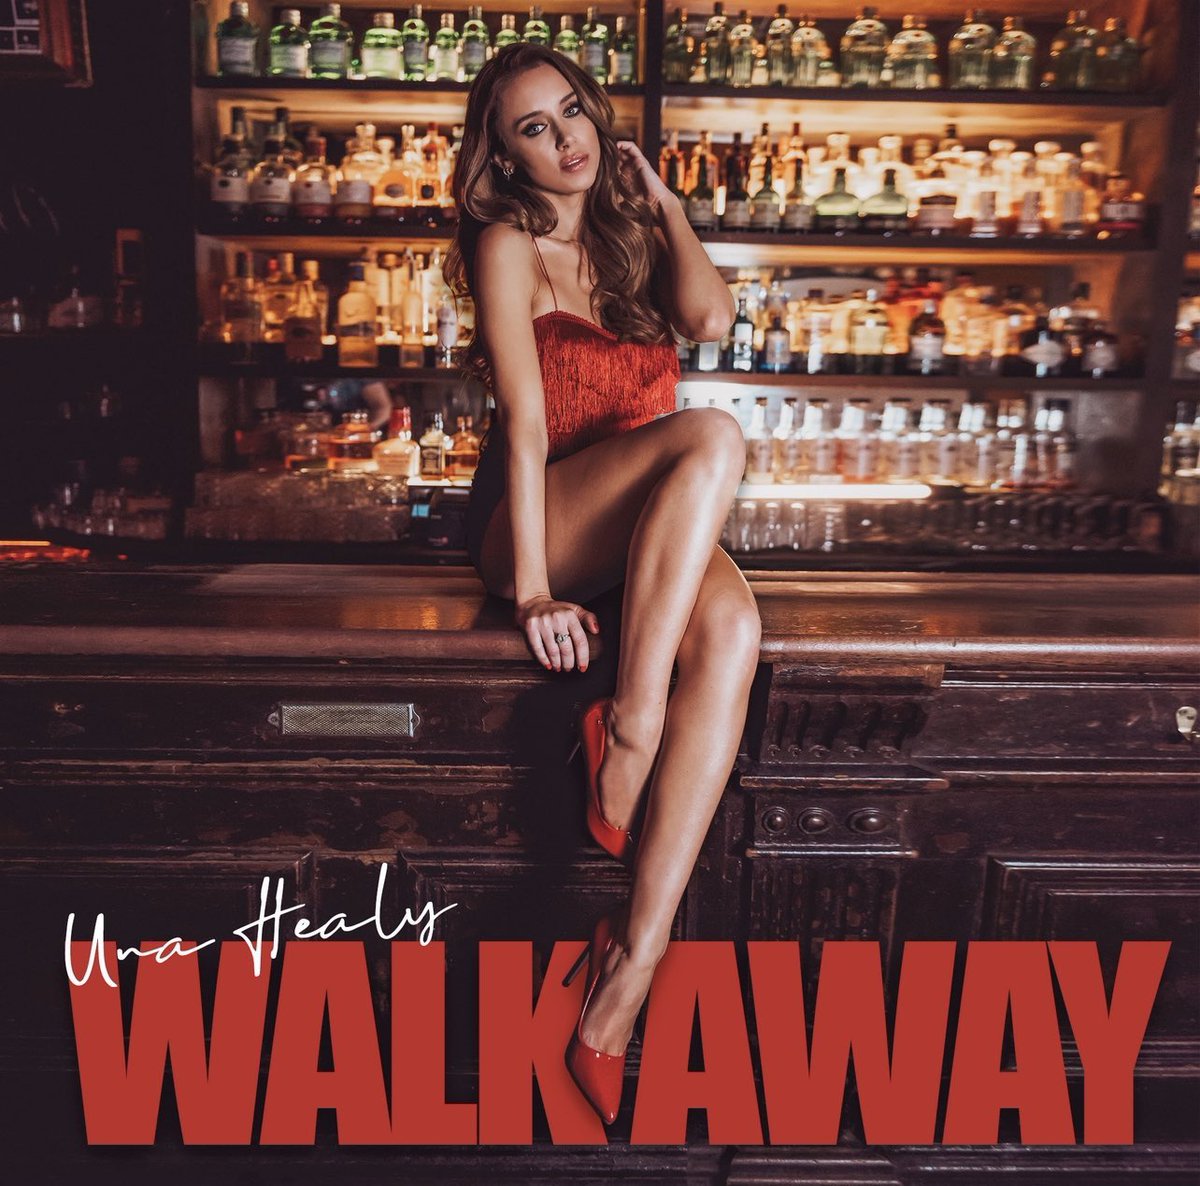 The latest single from singer songwriter @UnaHealy has just been released. Walk Away is her new upbeat song about courage and style - with a lot of humour in the lyrics - I think you’re going to love it! We’ll play the track and chat with Una after 2.30pm today @BBCRadioKent.